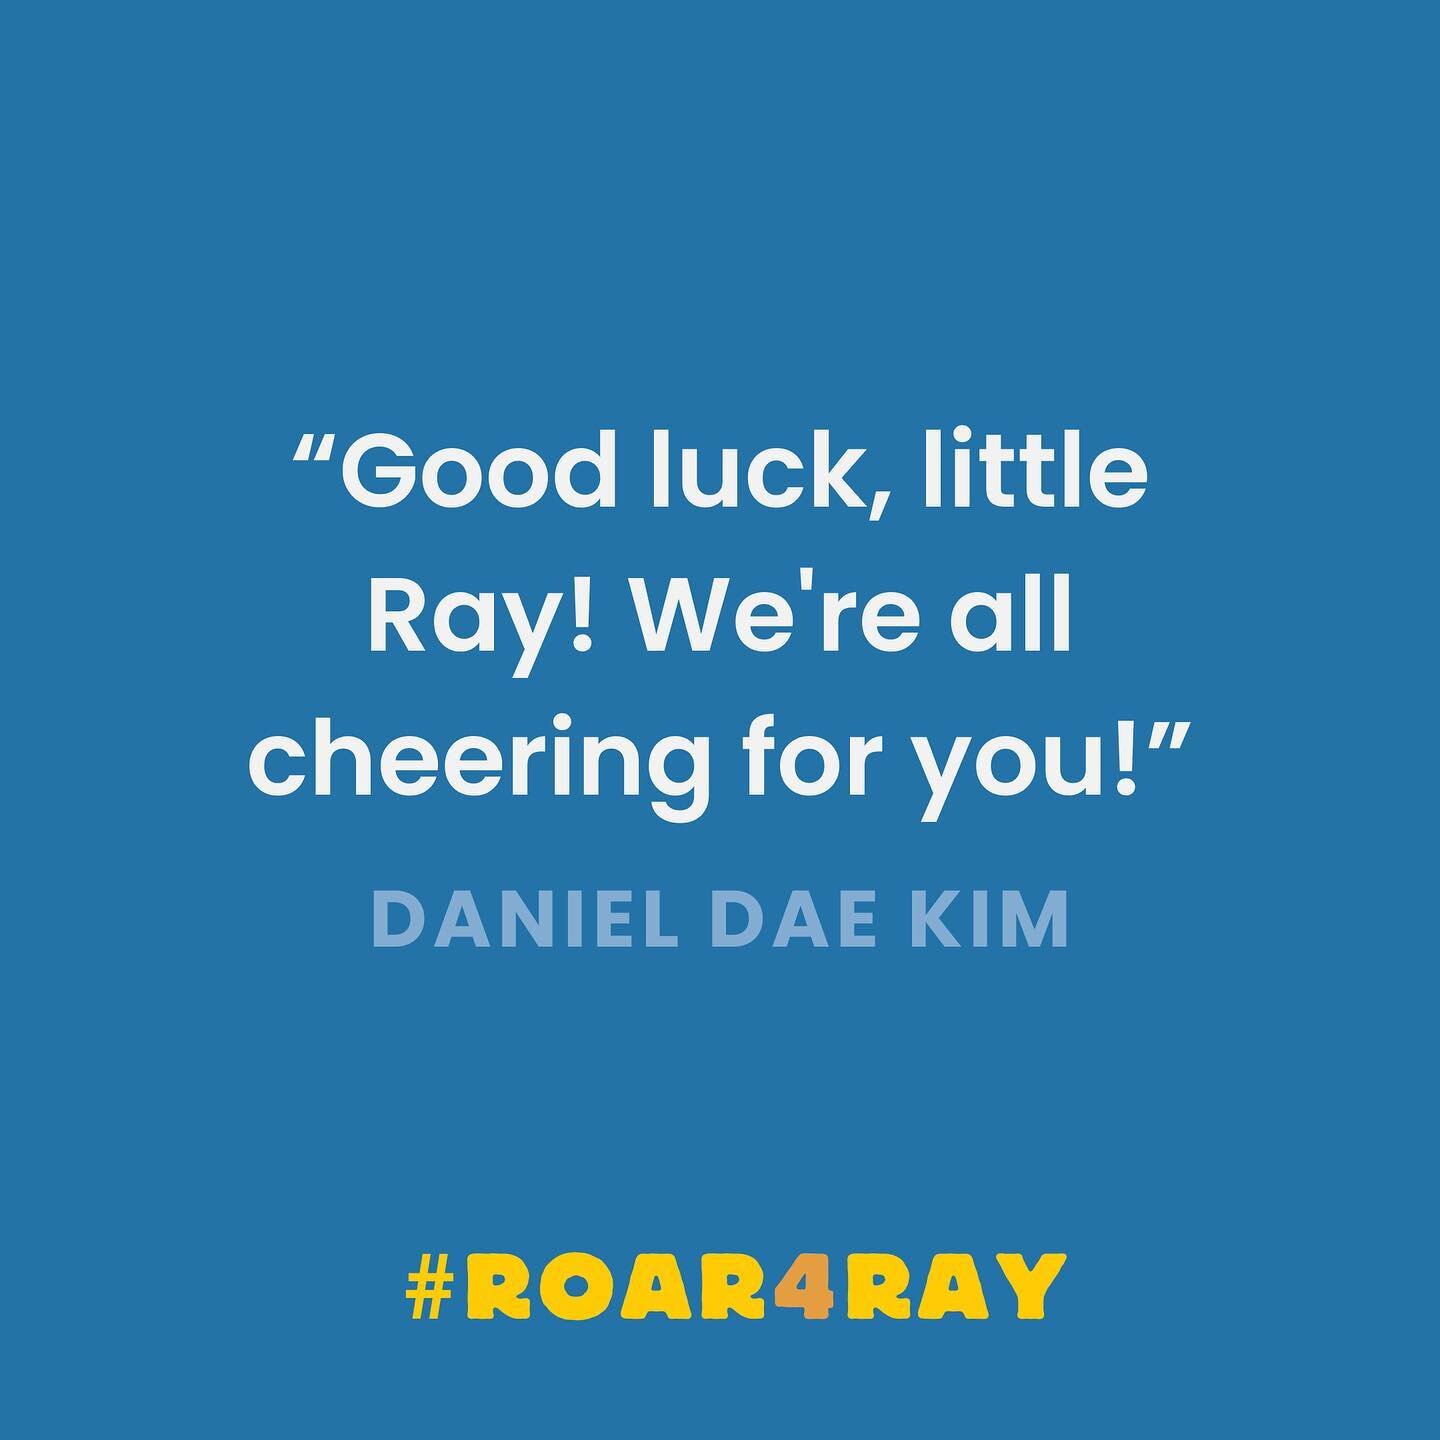 #Roar4Ray is an intuitive to find a match for 7-year-old Ray who has been diagnosed with XLP2. We&rsquo;re supporting Ray and his whole family, in hopes that we help find him a match.

This #FathersDay, register online for an at-home swab kit and you